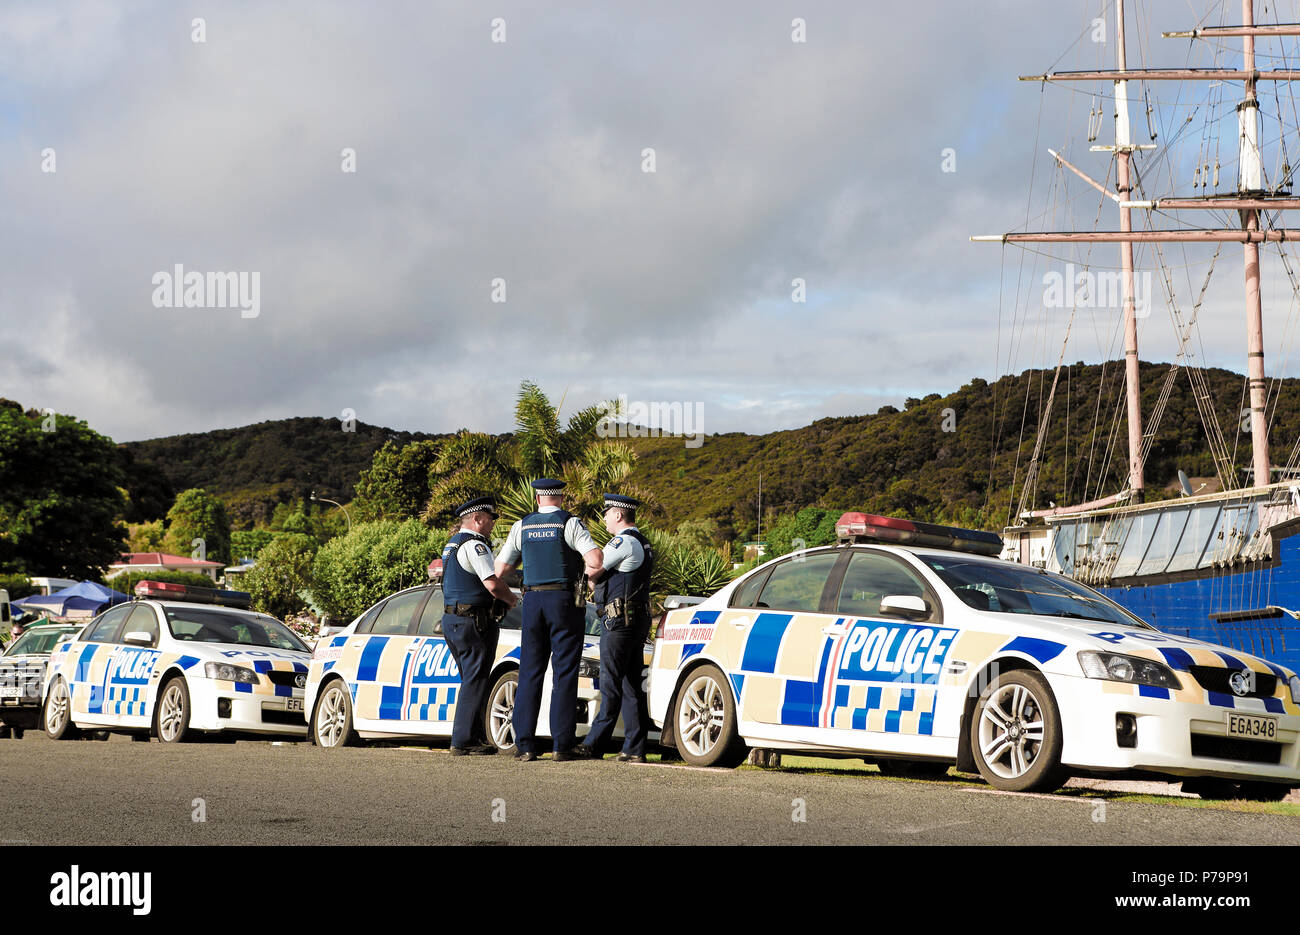 Police officers and patrol cars on standby at Waitangi Day celebrations in Waitangi, Bay of Islands, New Zealand Stock Photo